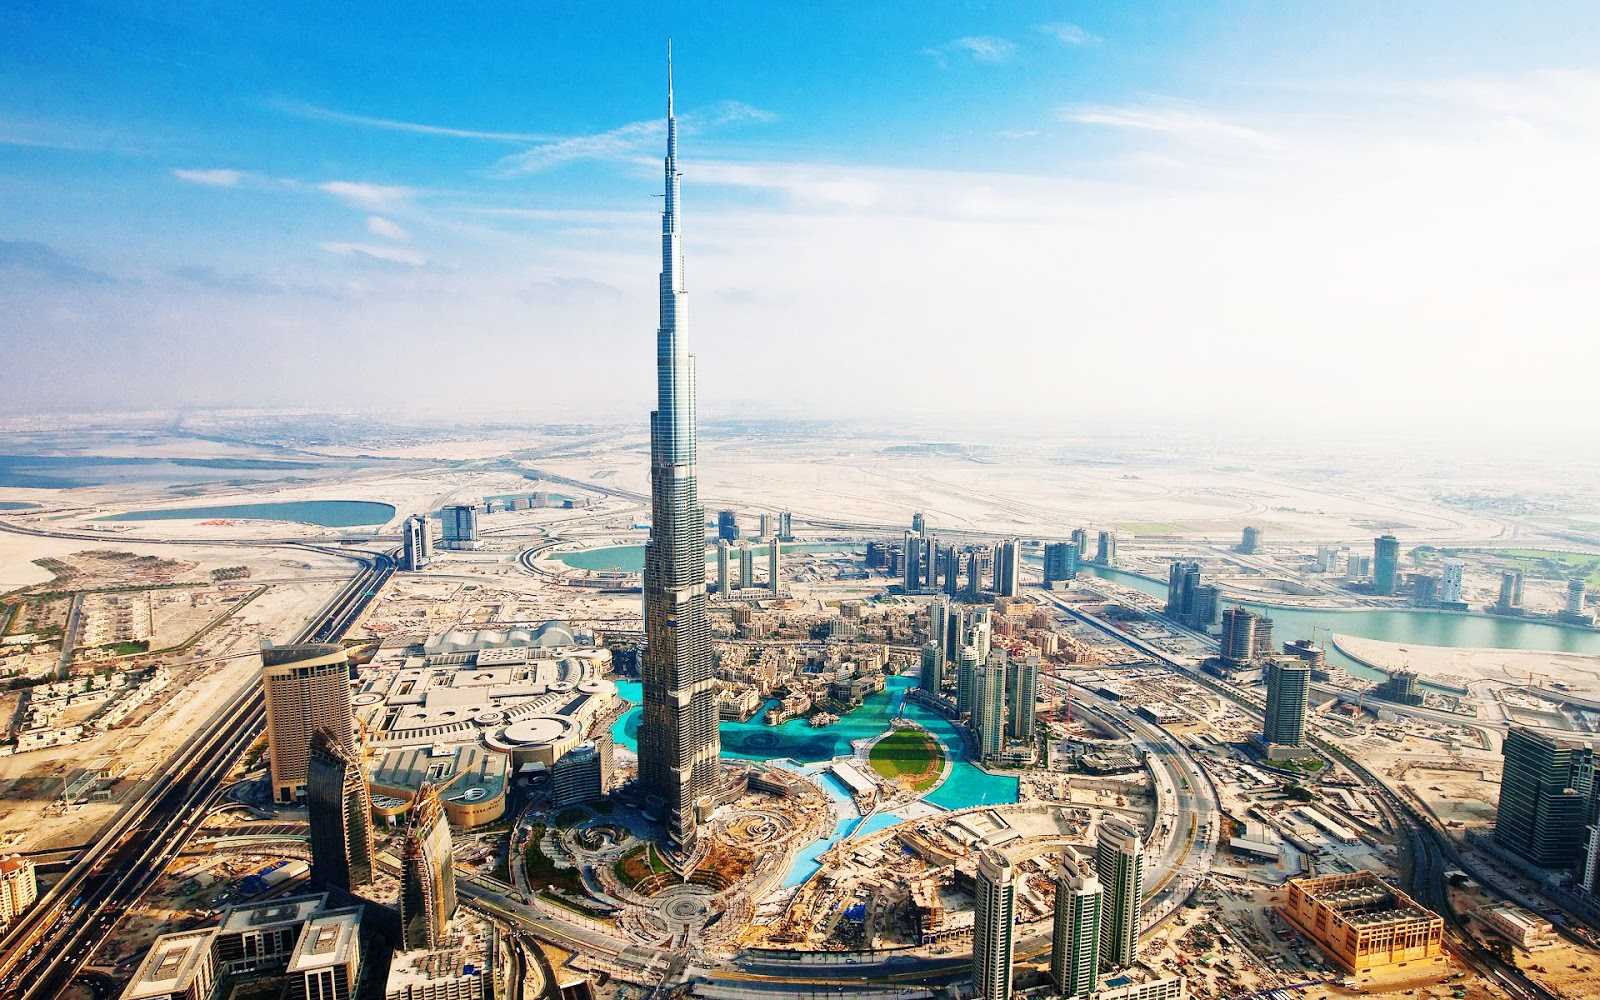 Luxury redefined : A 4 Day Dubai Tour Package with Visa on Arrival